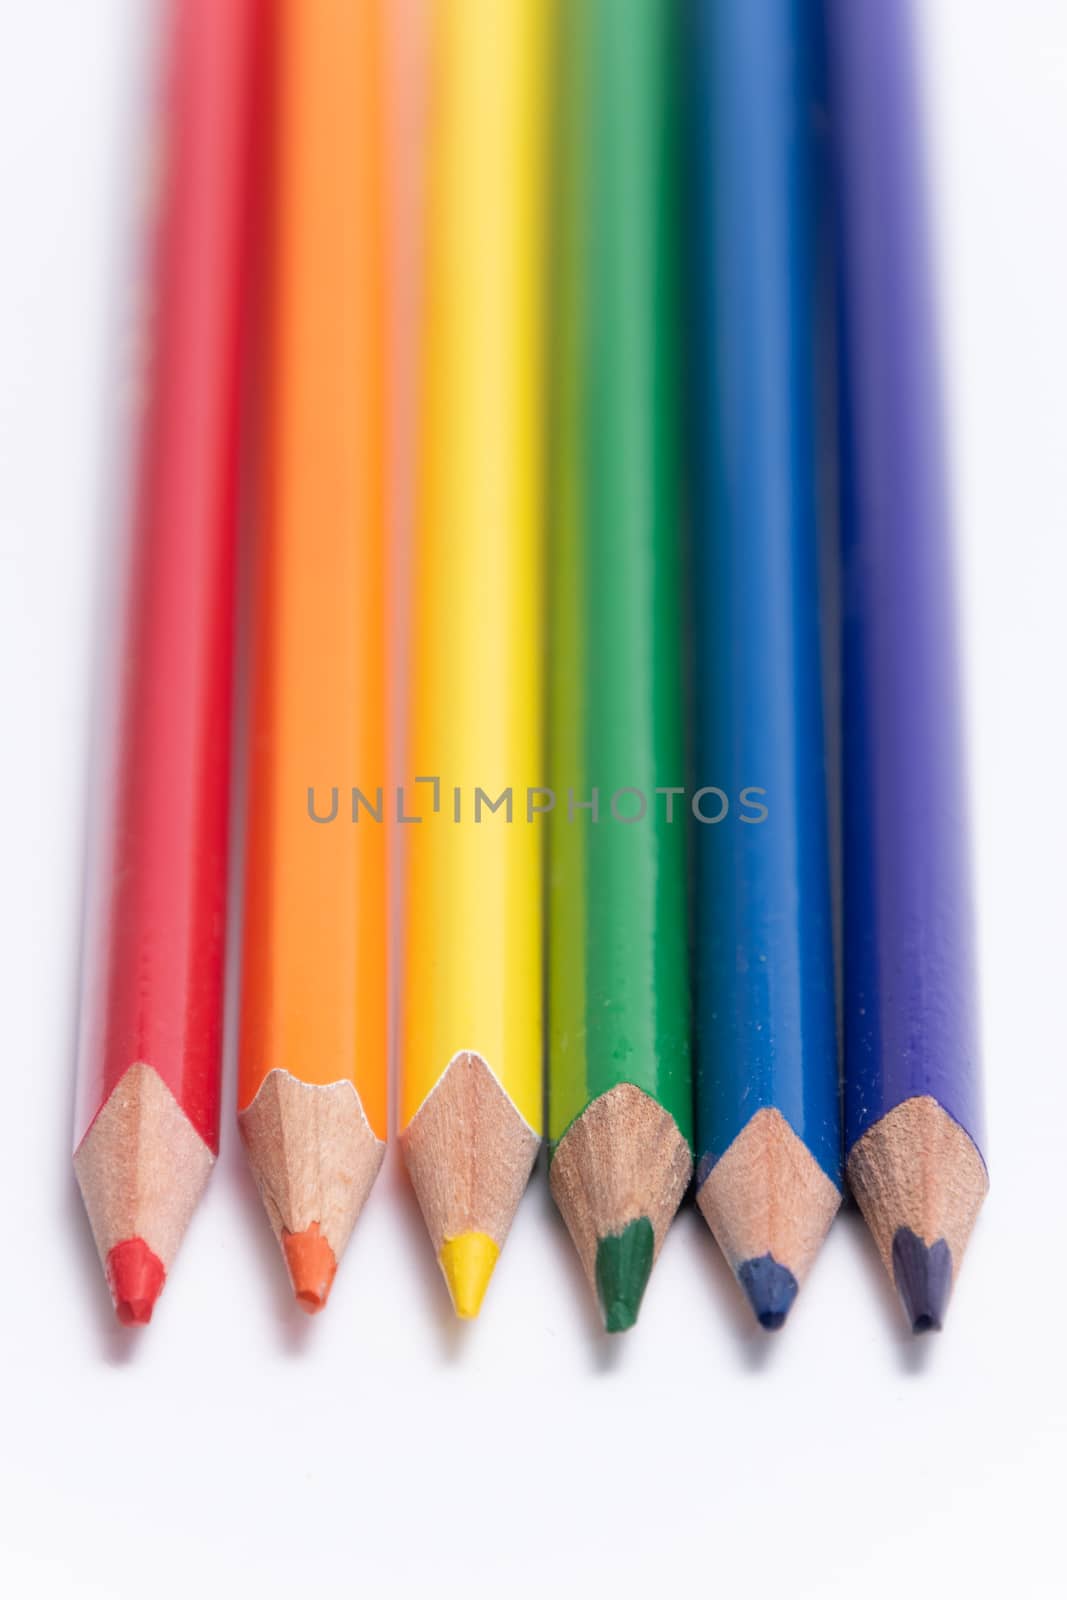 Crayons colored pencil in different colors crayon rainbow colors by MXW_Stock